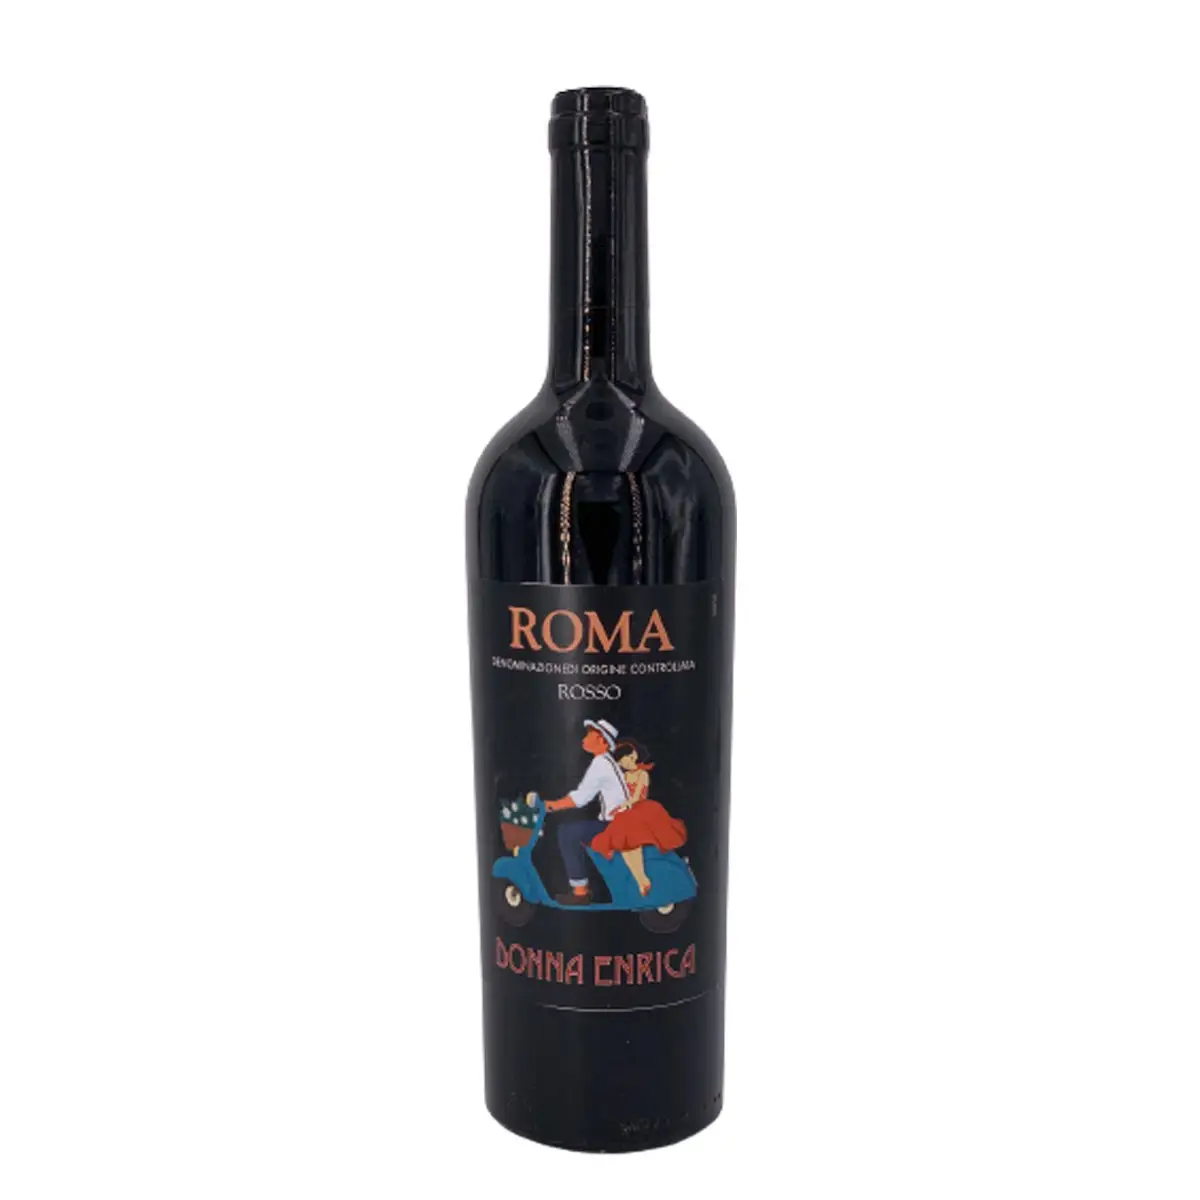 Superior Quality Italian Red Wine ROMA ROSSO DOC from Lazio Central Italy Vineyard Ruby Red Wine for all meals